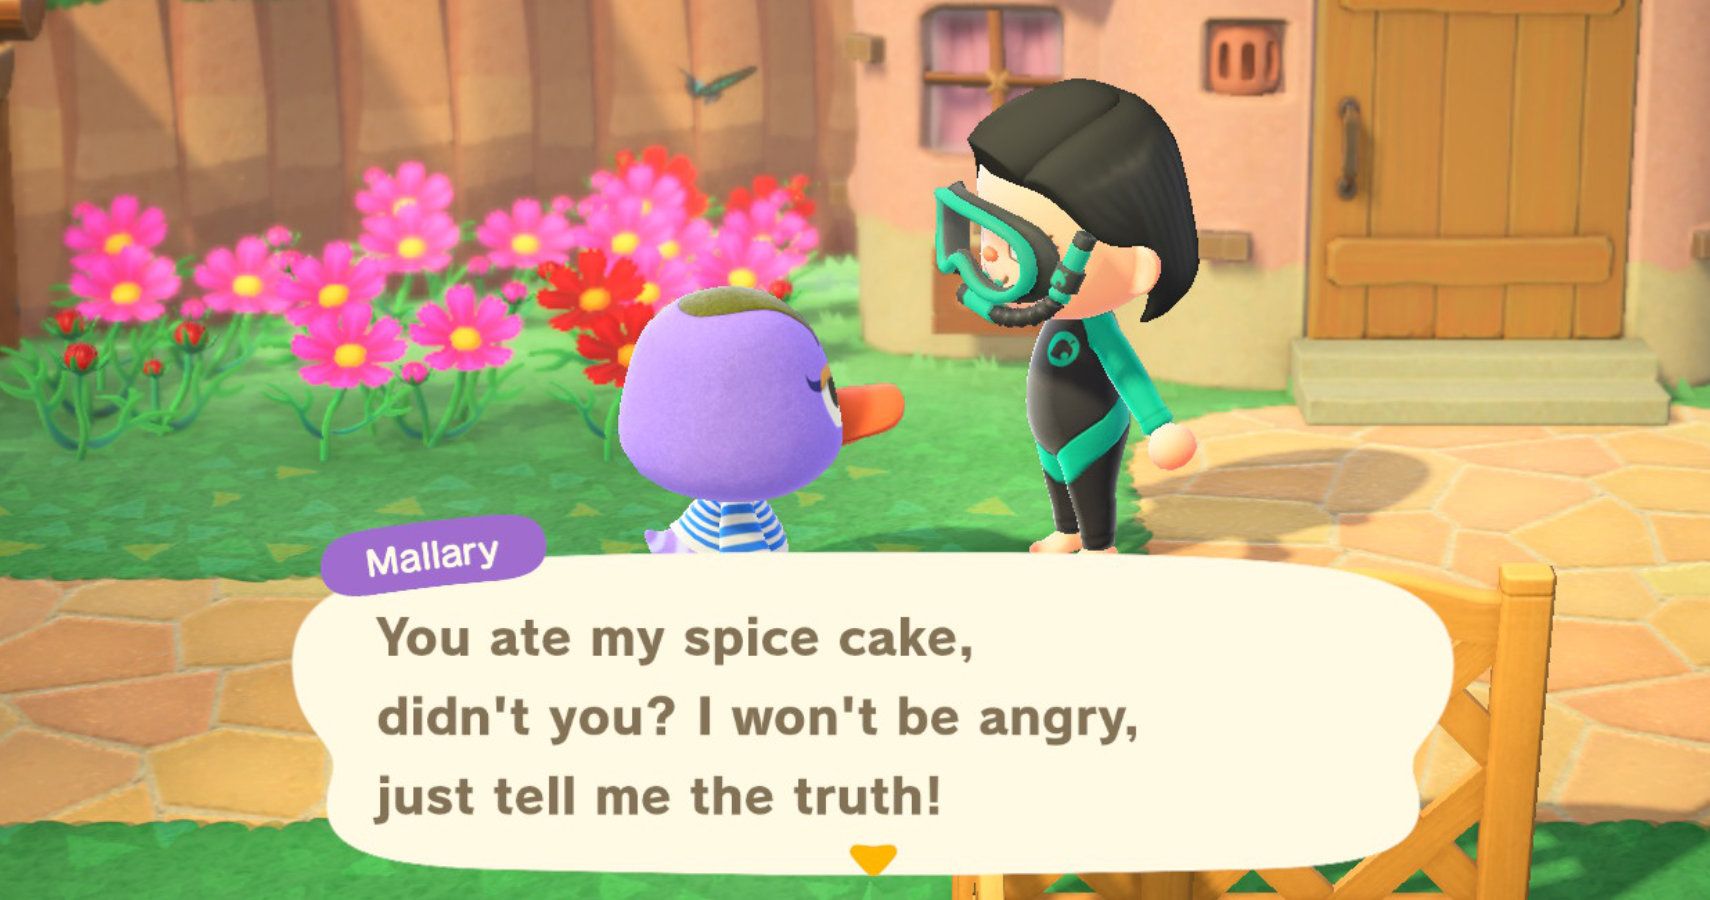 Mallary accusing me of eating her cake.